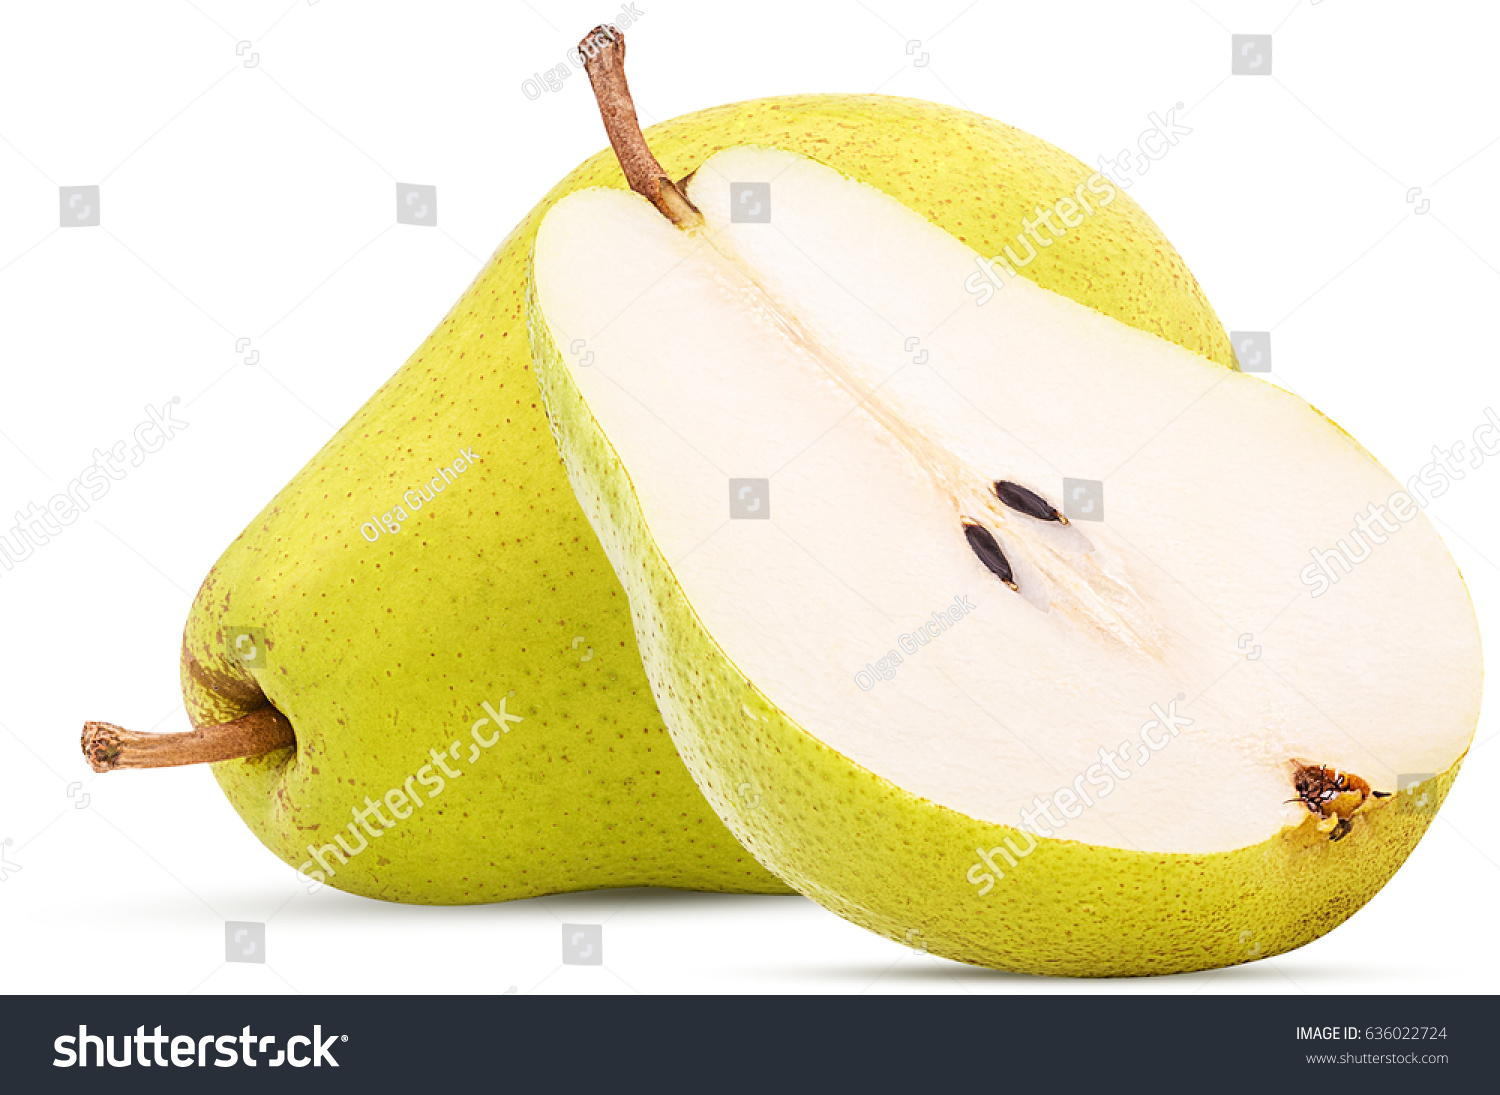 Fresh pears, one and a half yellow fruit isolated on white background #636022724